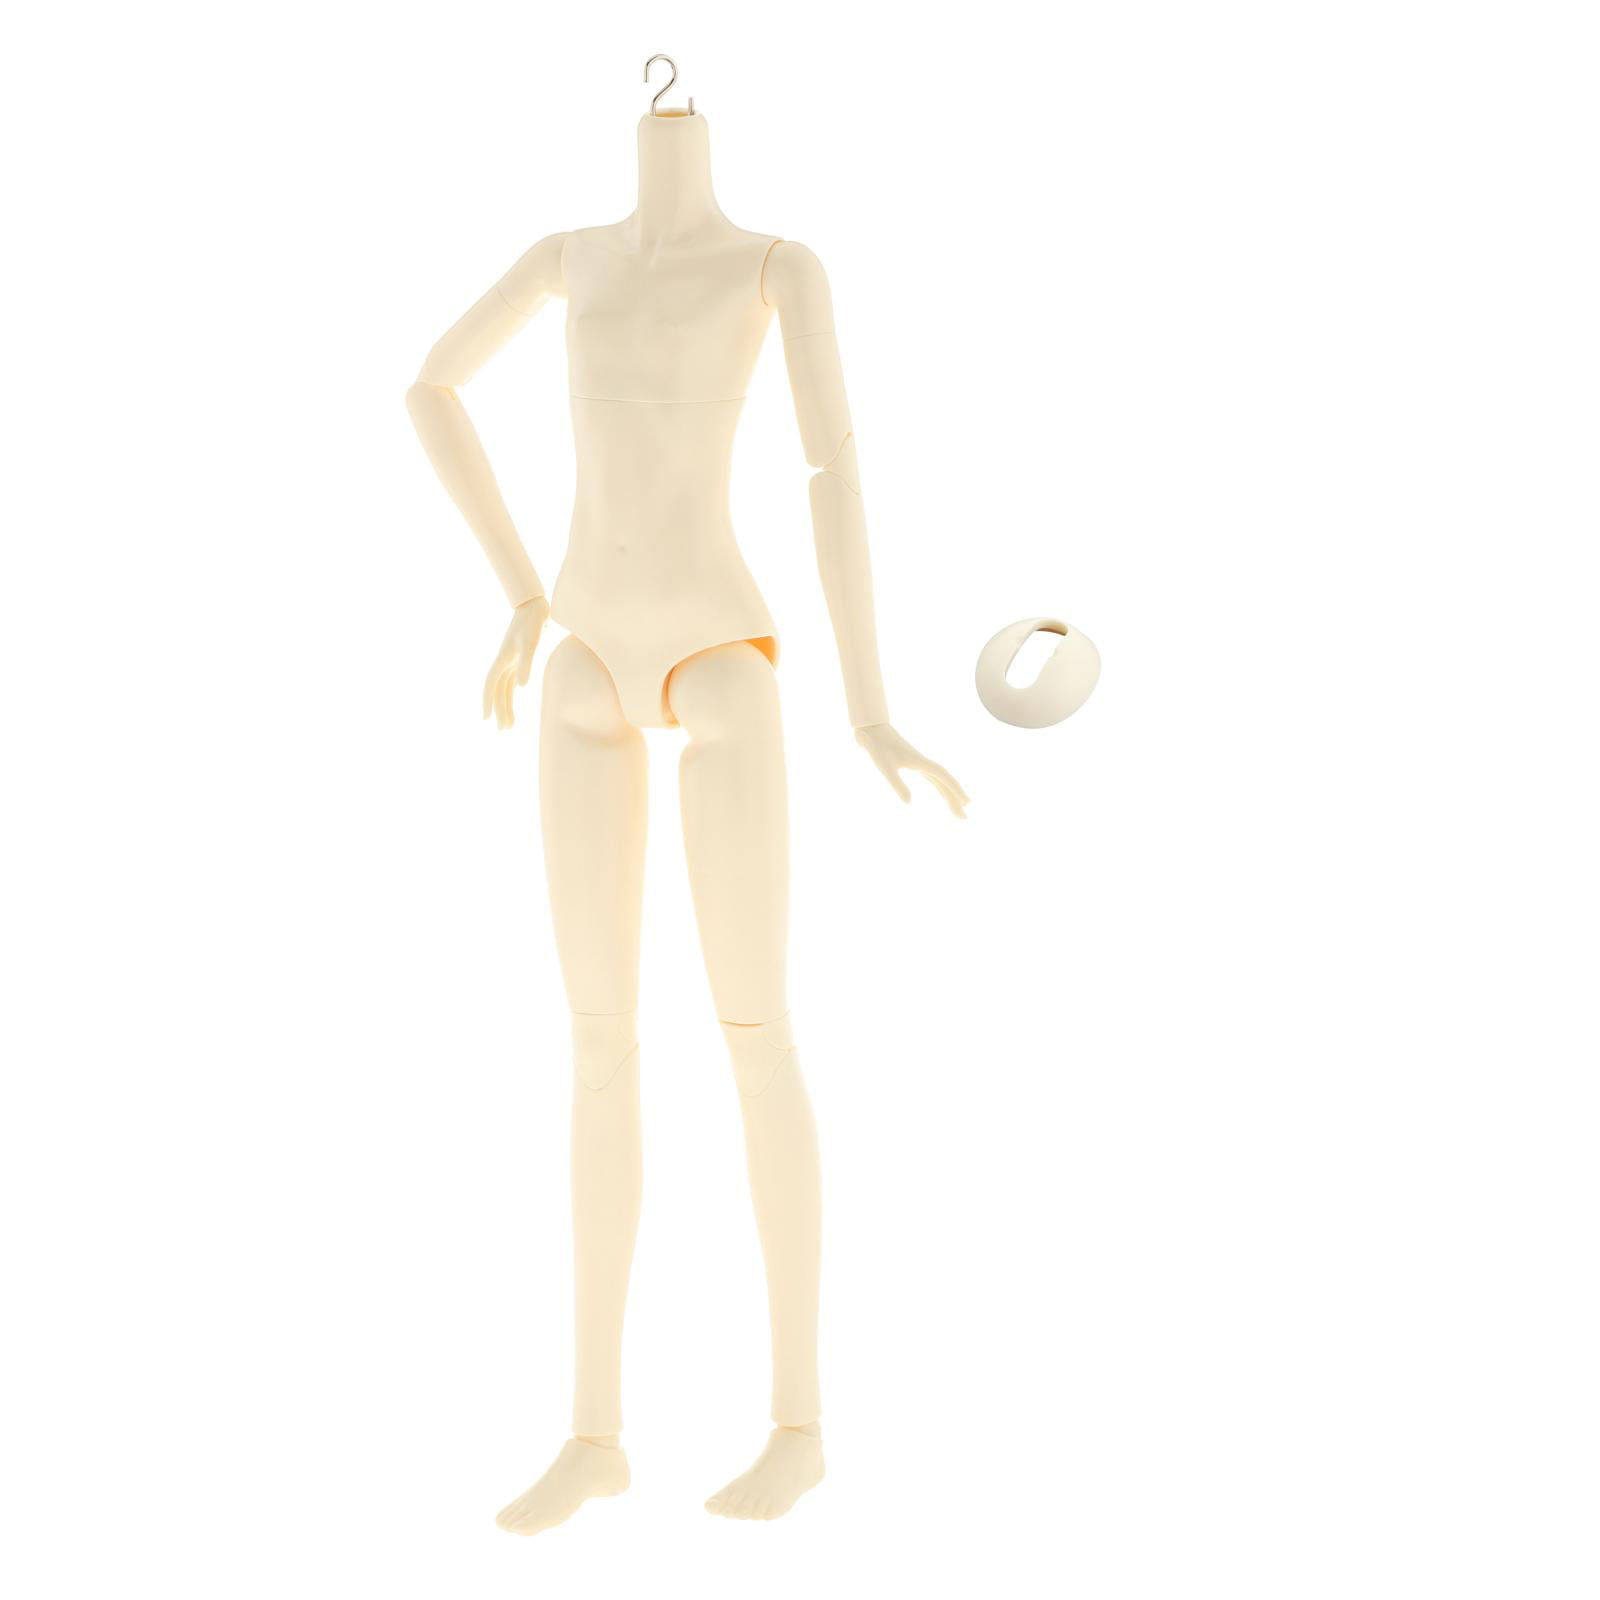 Doll Body,Flexible Jointed Doll Nude DIY,51cm Moveable Joints Body DIY  Making,20inch 1/3 Doll Toys,20 Joints Nude Girl Ball Jointed Dolls -  Walmart.com